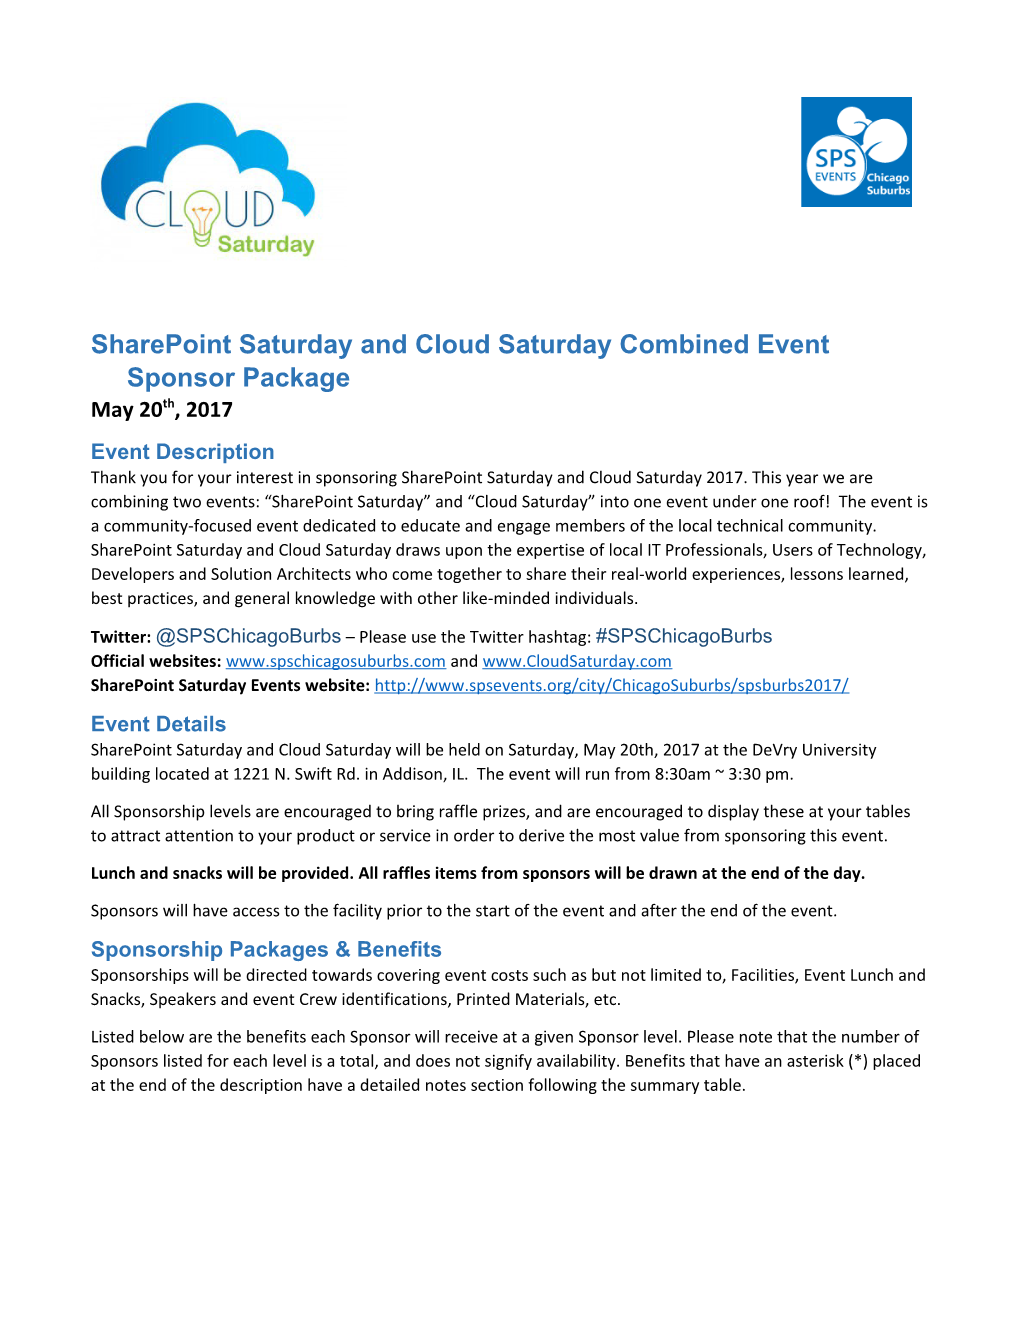 Sharepoint Saturday Chicago Suburbs - Sponsor Package